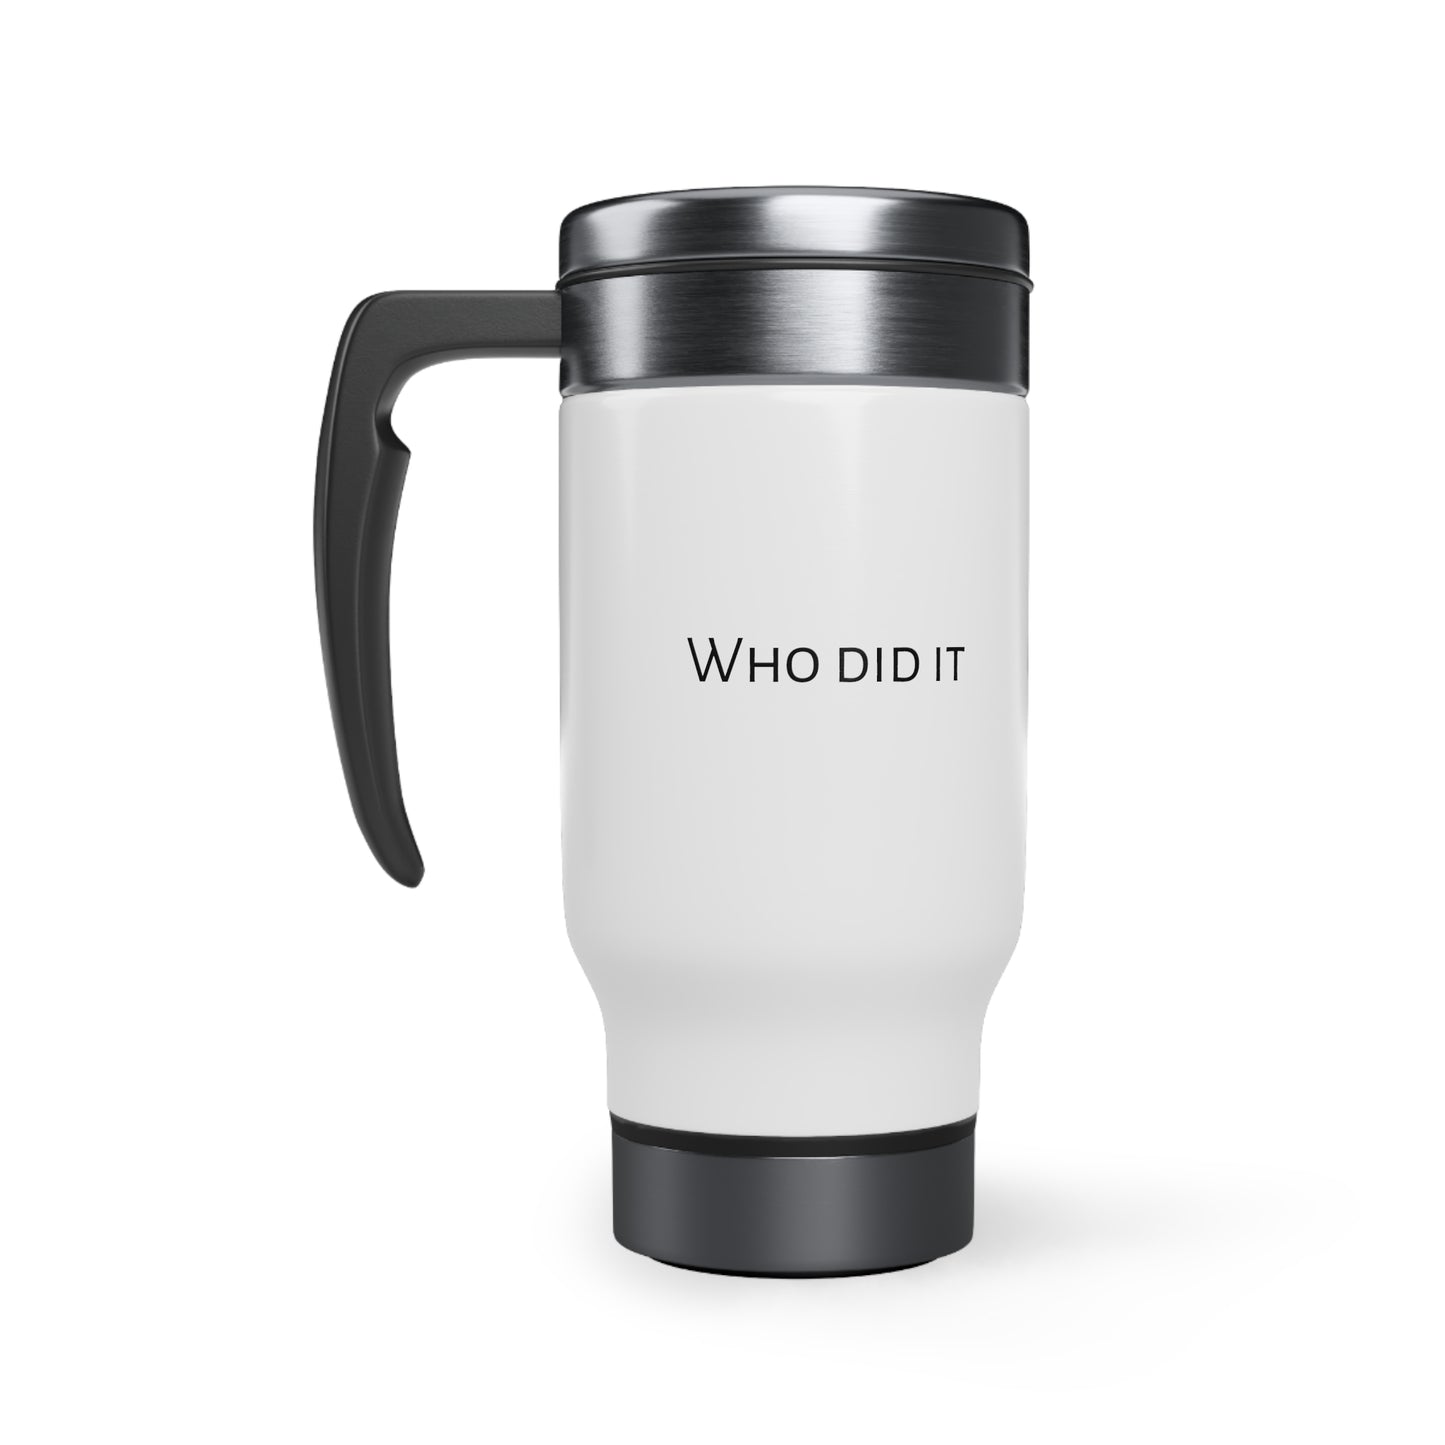 Who did it Stainless Steel Travel Mug with Handle, 14oz